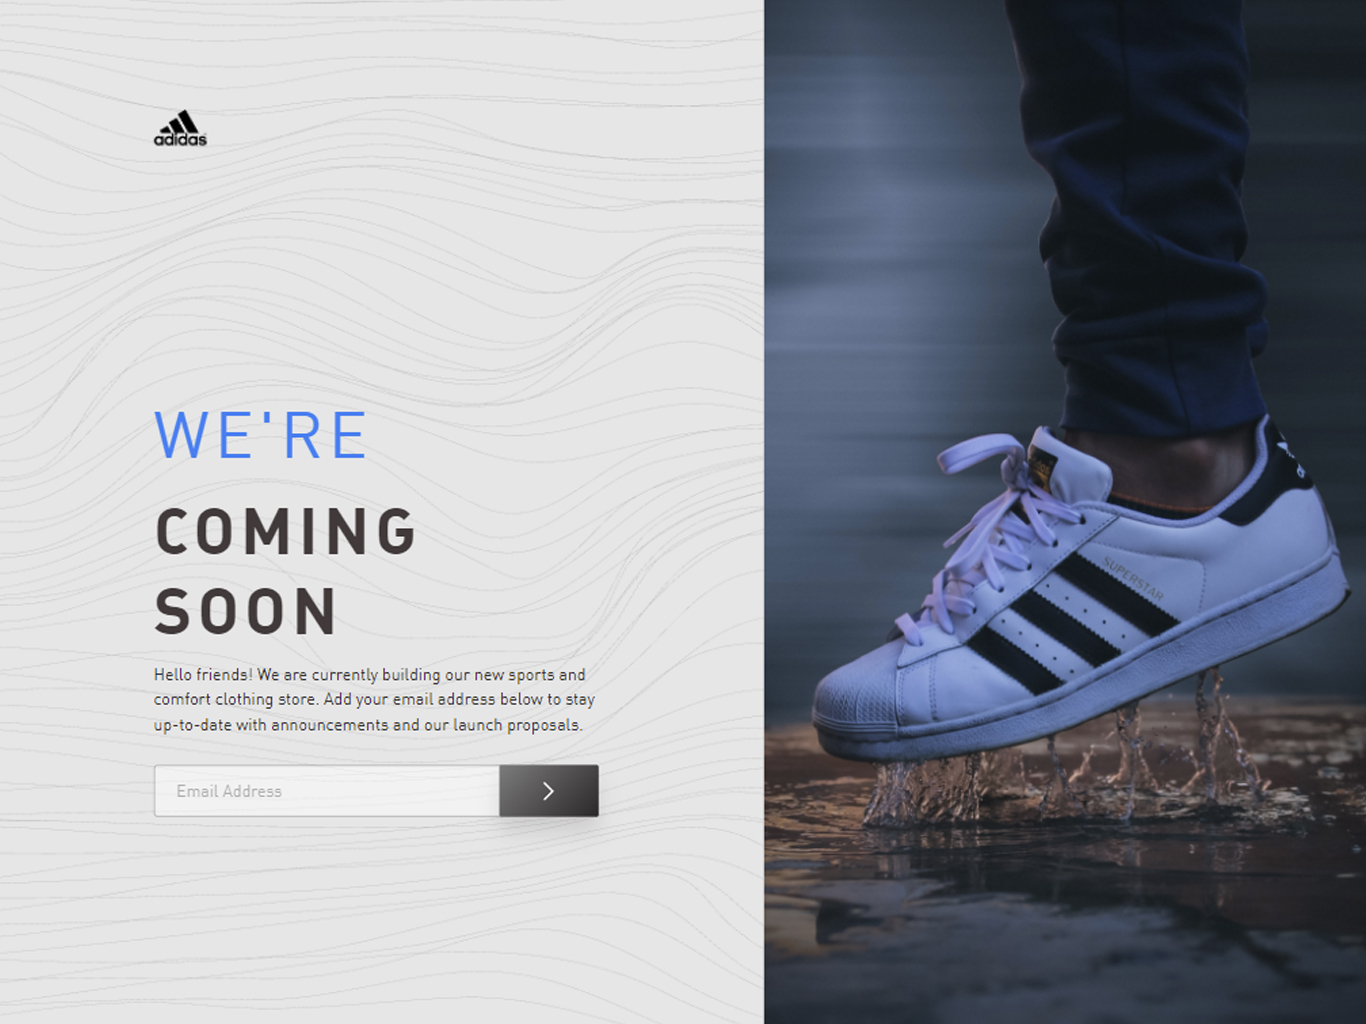 A webpage display for an upcoming Adidas store; there is a picture of a foot showcasing adidas shoes running through the rain.